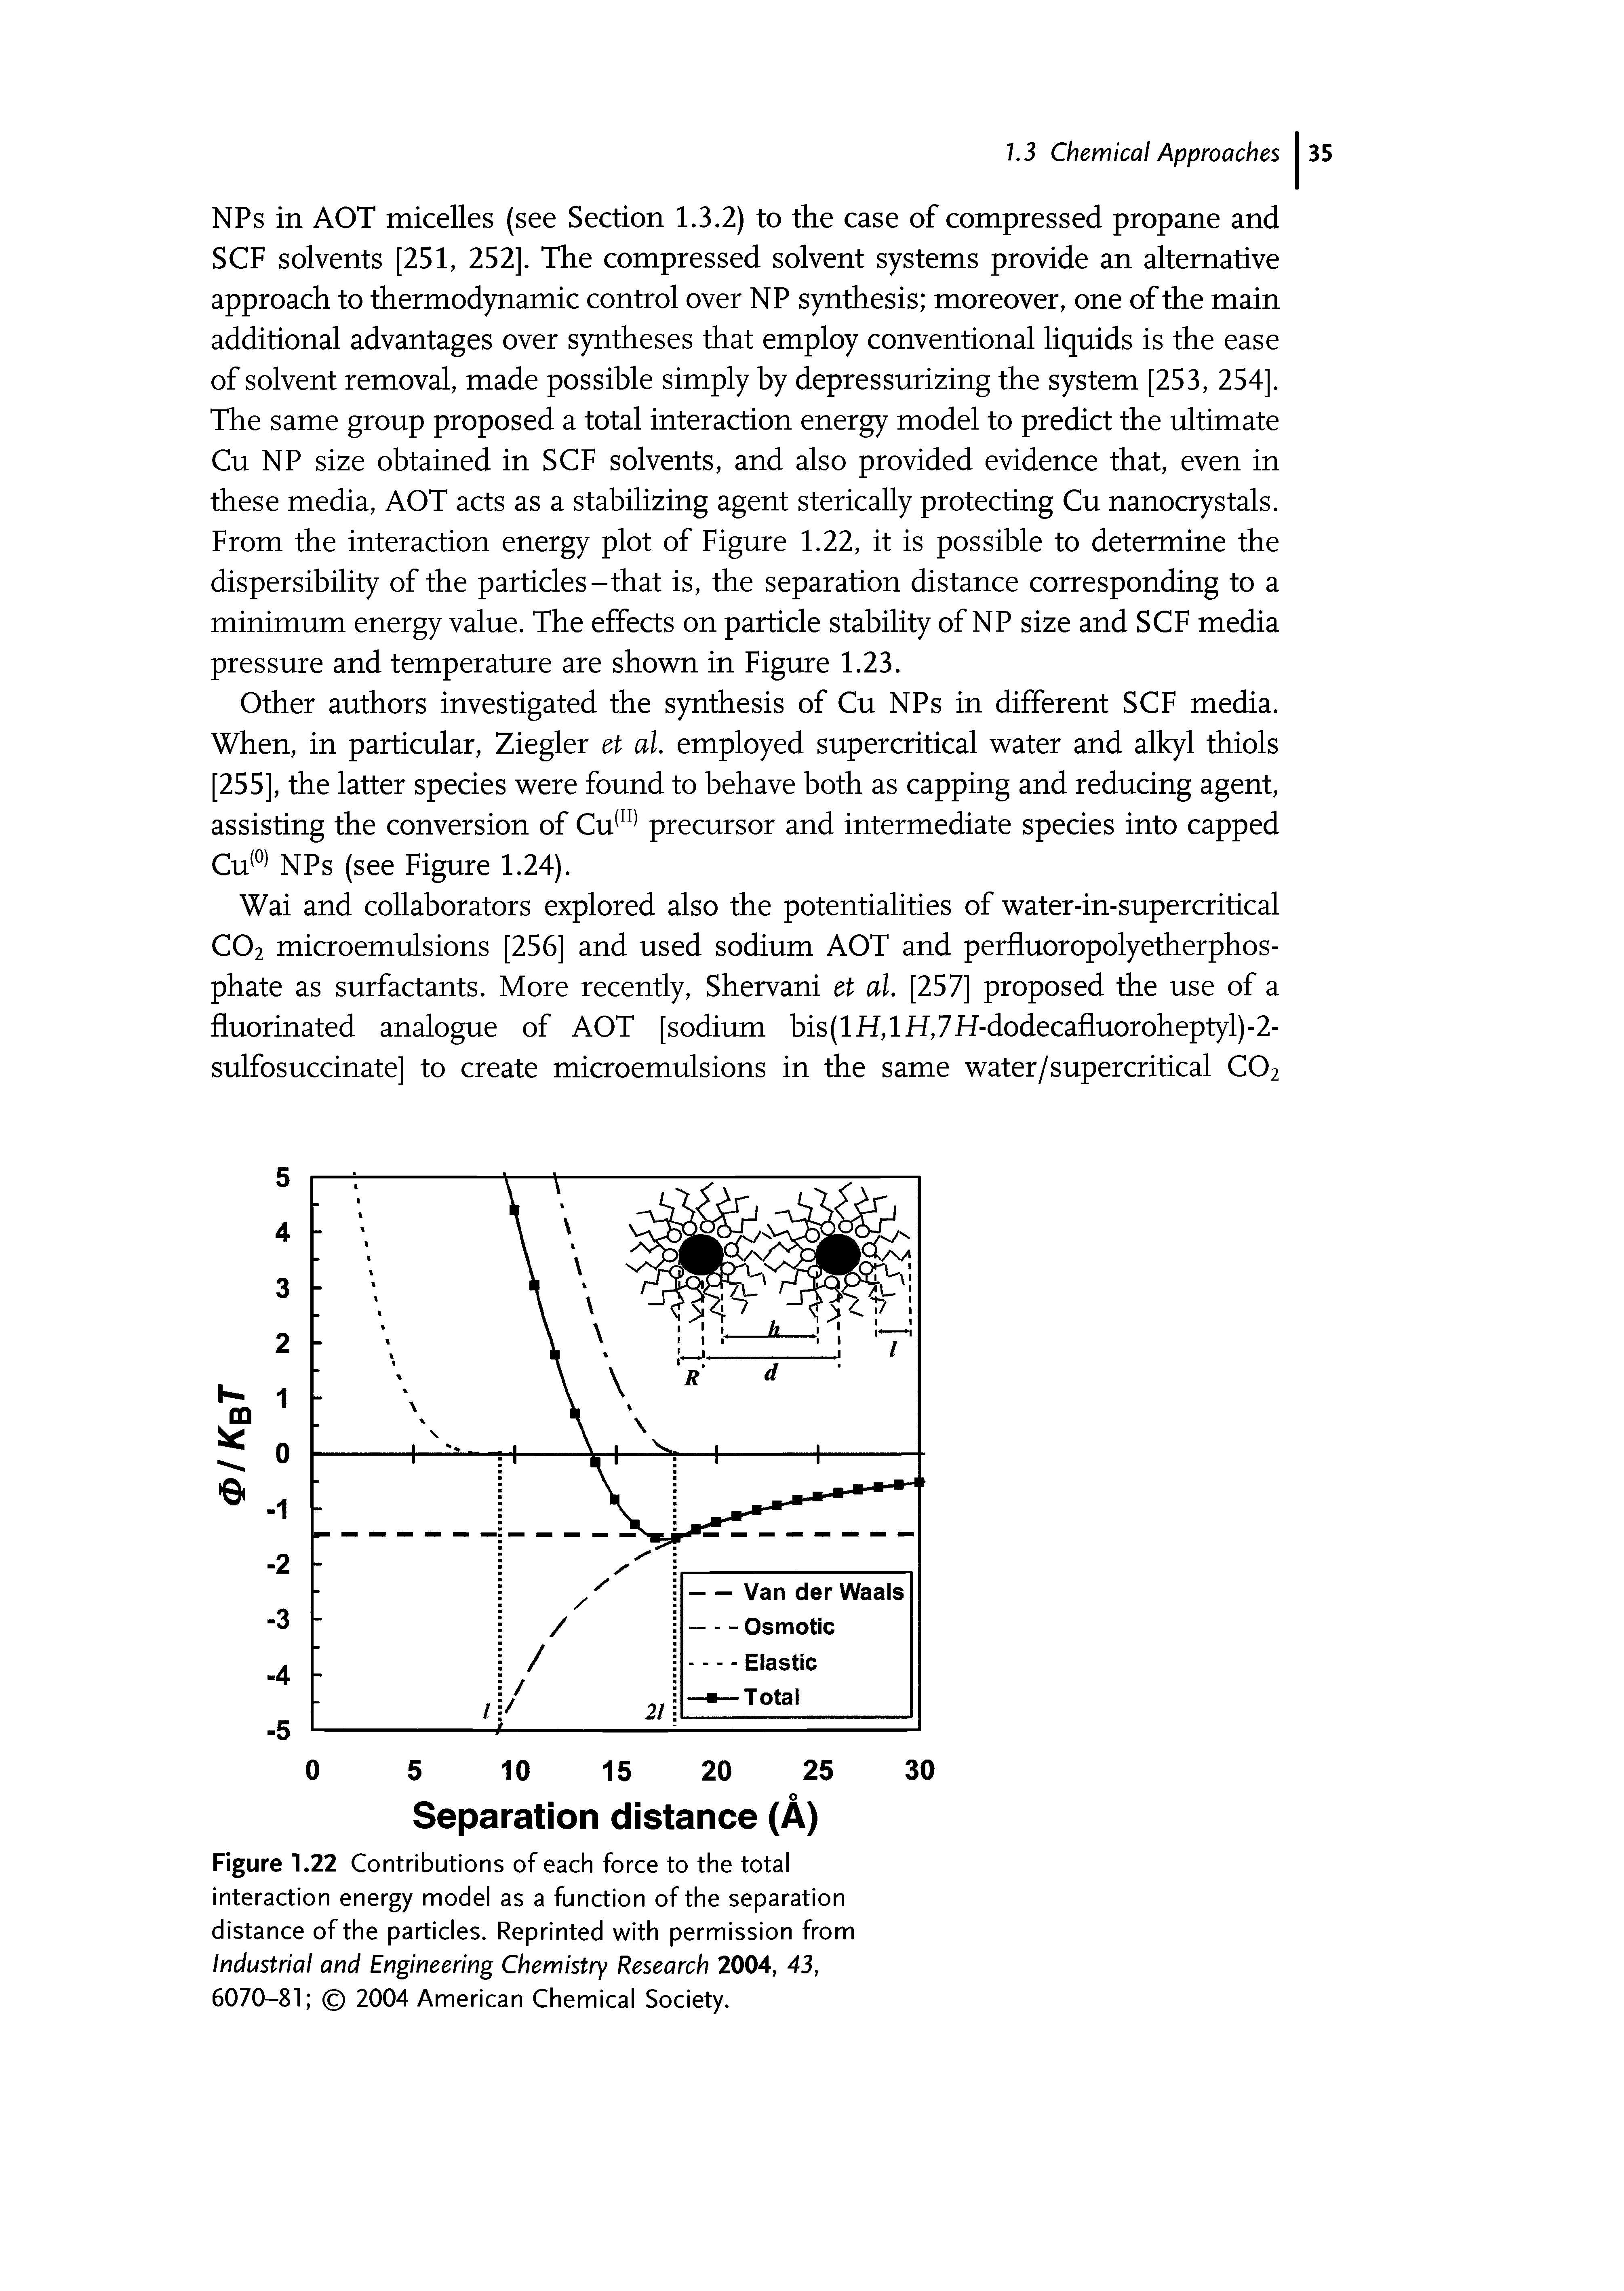 Figure 1.22 Contributions of each force to the total interaction energy model as a function of the separation distance of the particles. Reprinted with permission from Industrial and Engineering Chemistry Research 2004, 43, 6070-81 2004 American Chemical Society.